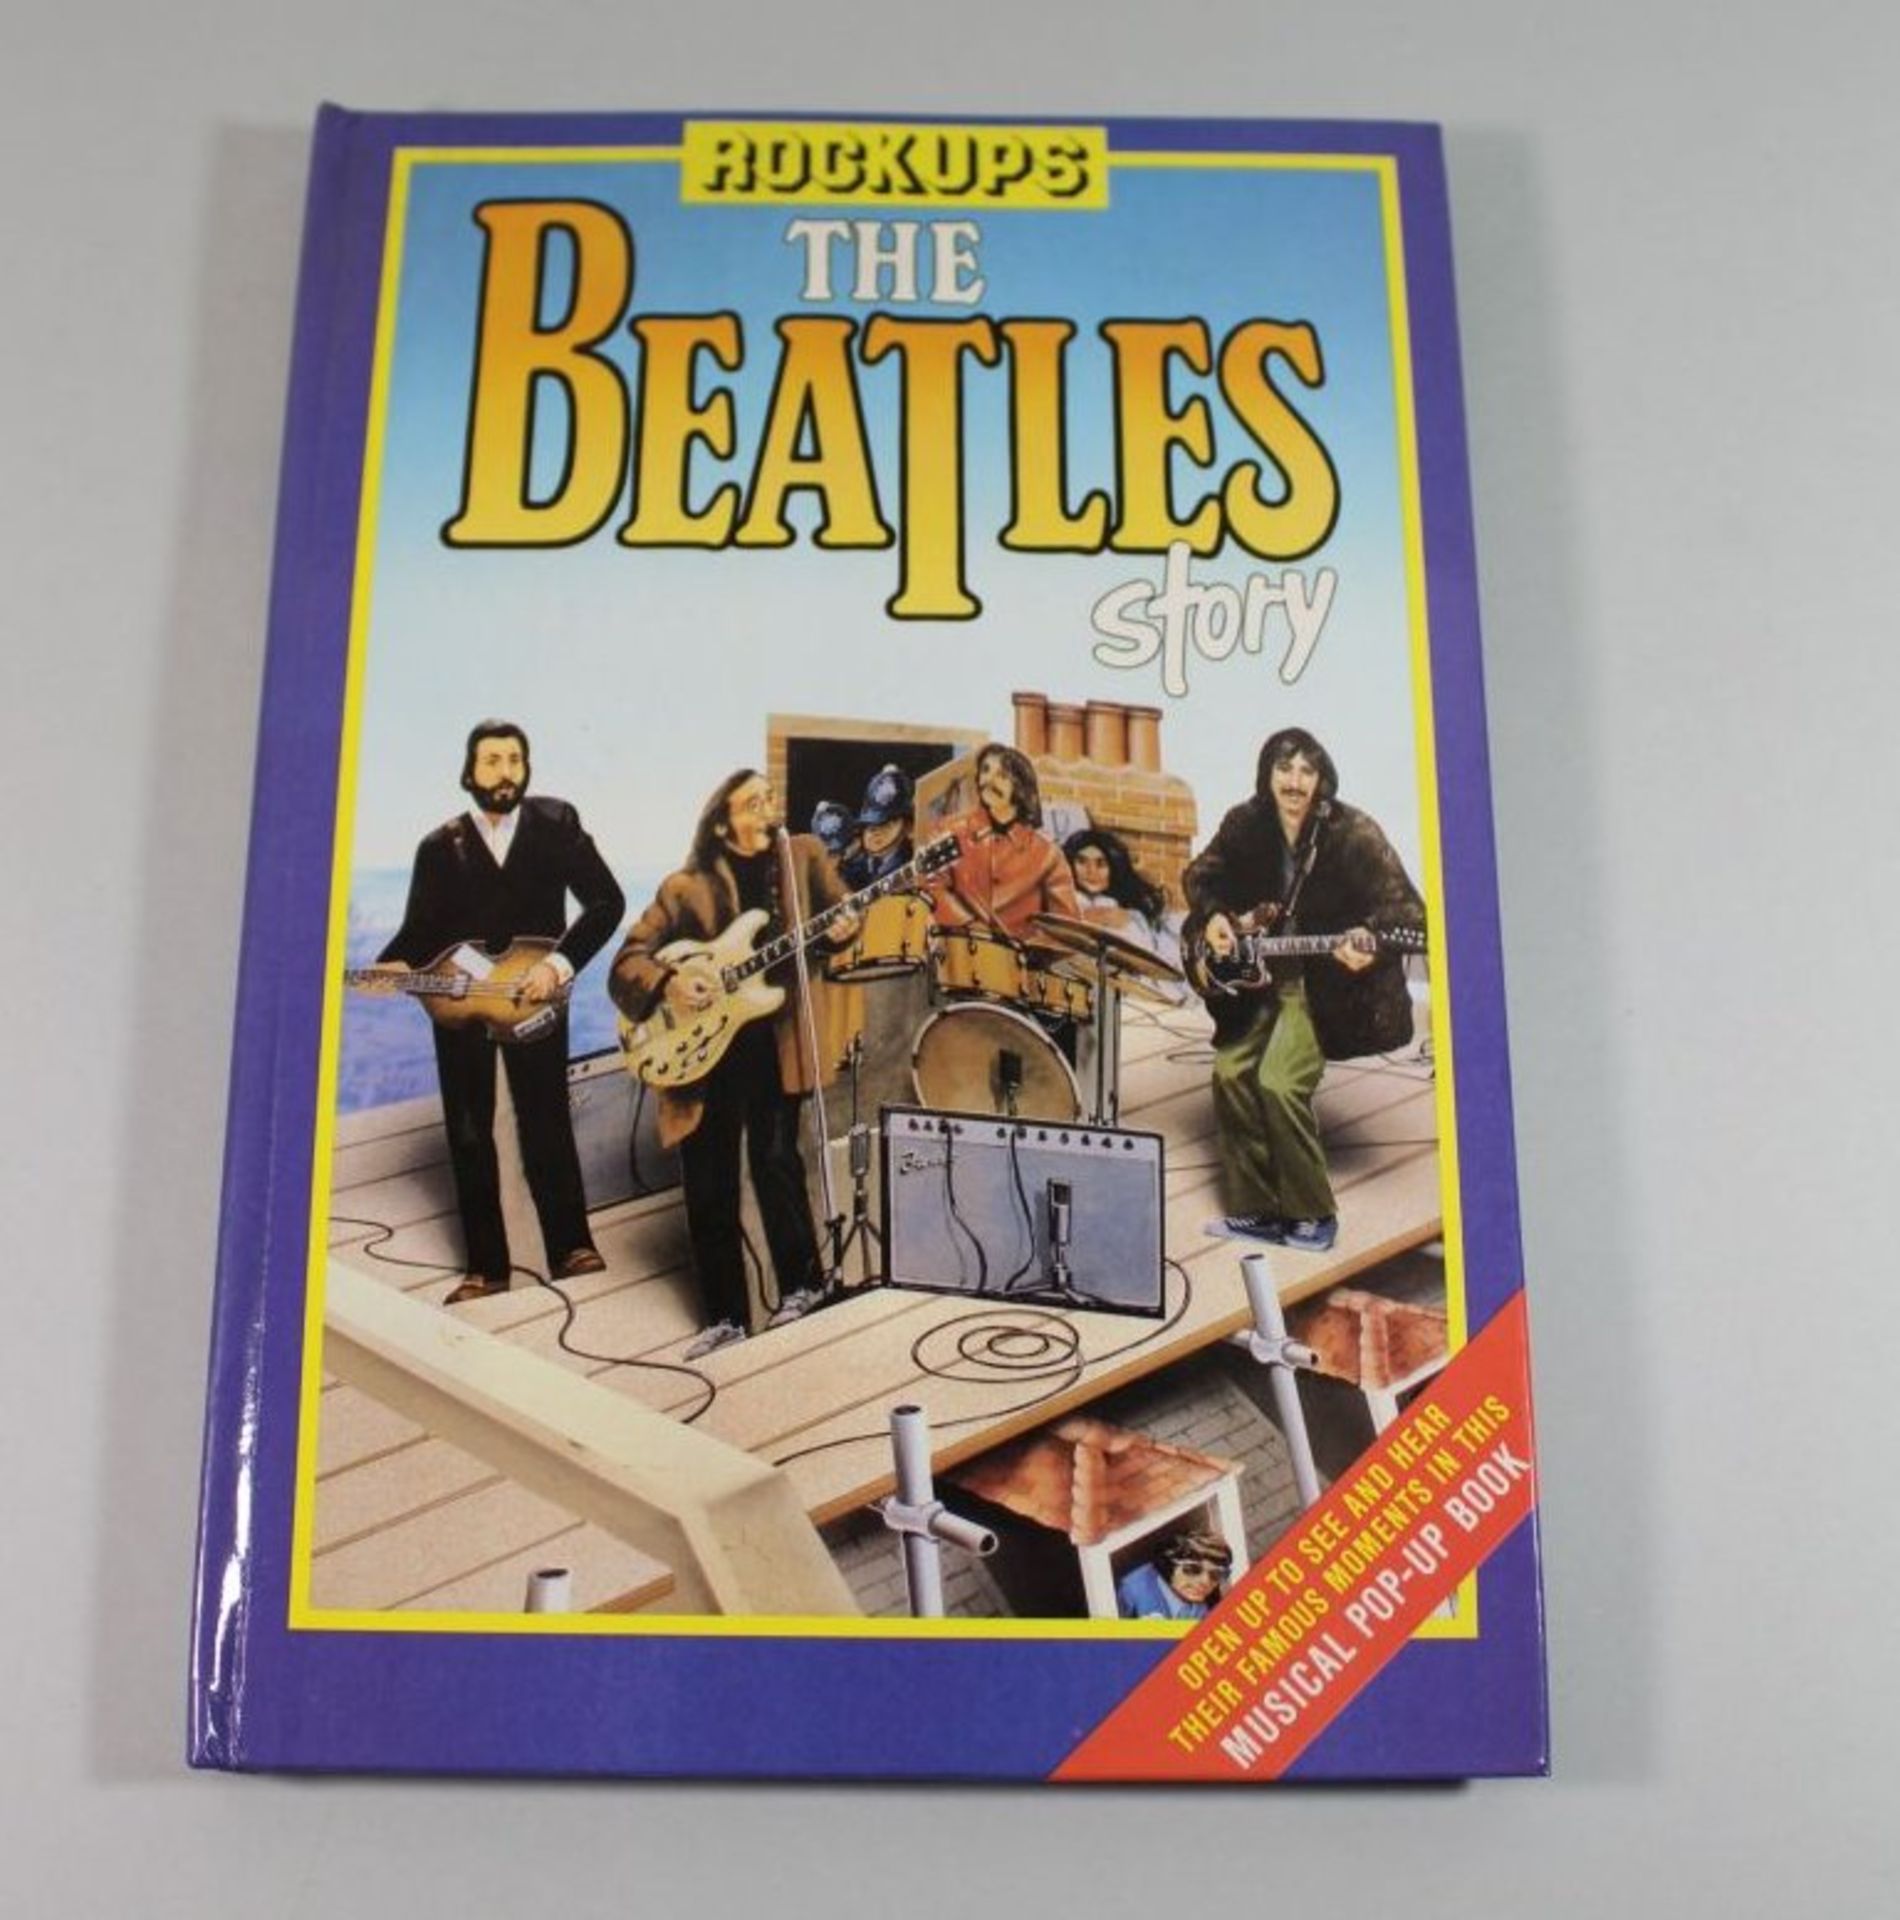 The Beatles Story, Rockups.